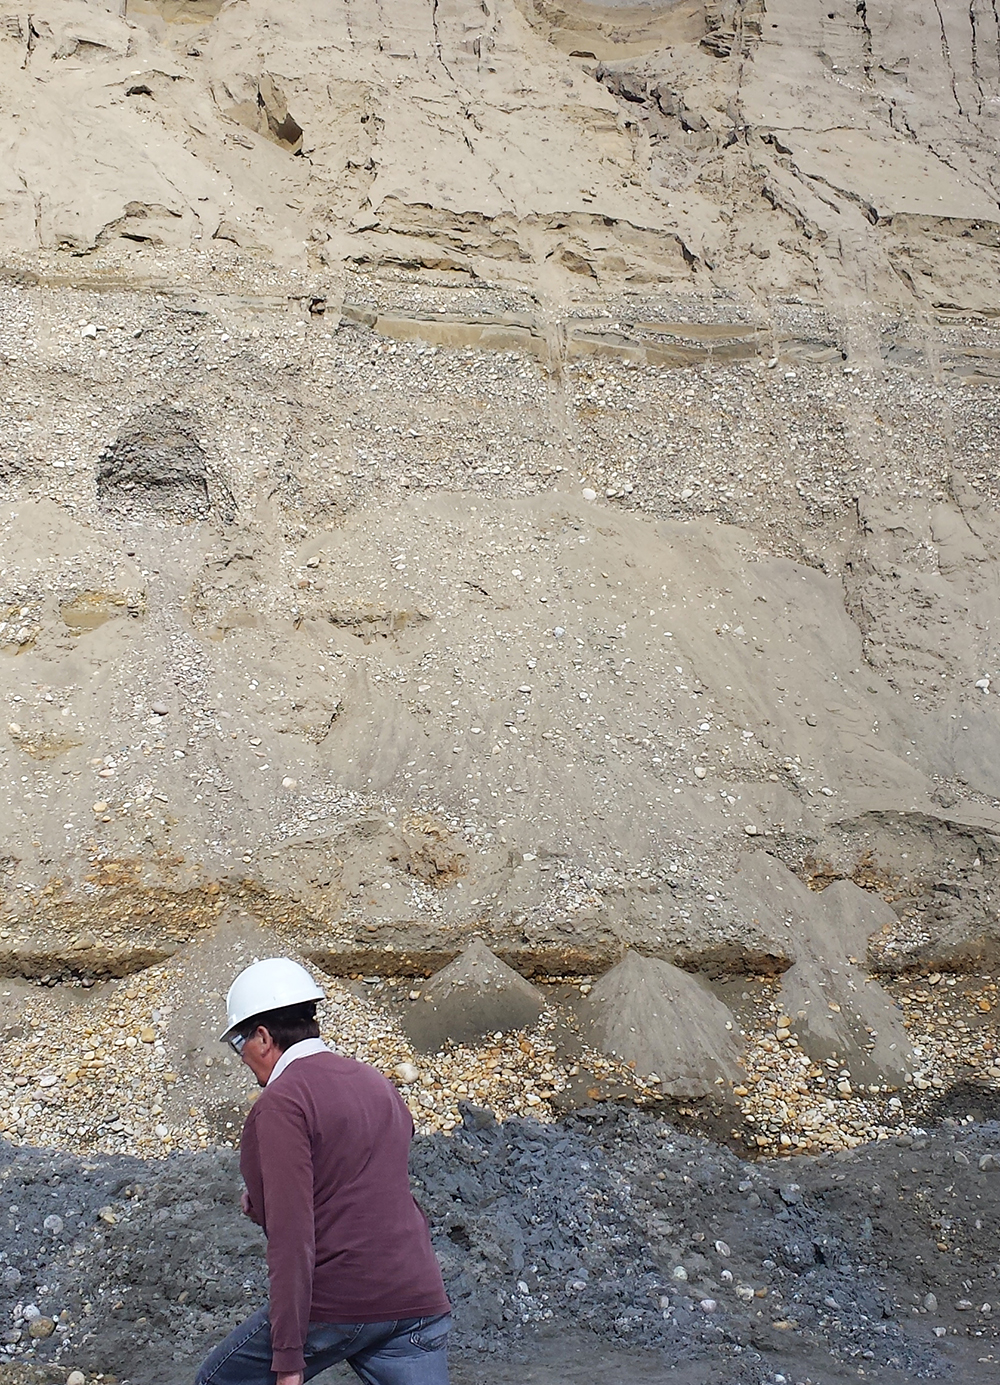 Outcrop of sand and gravel